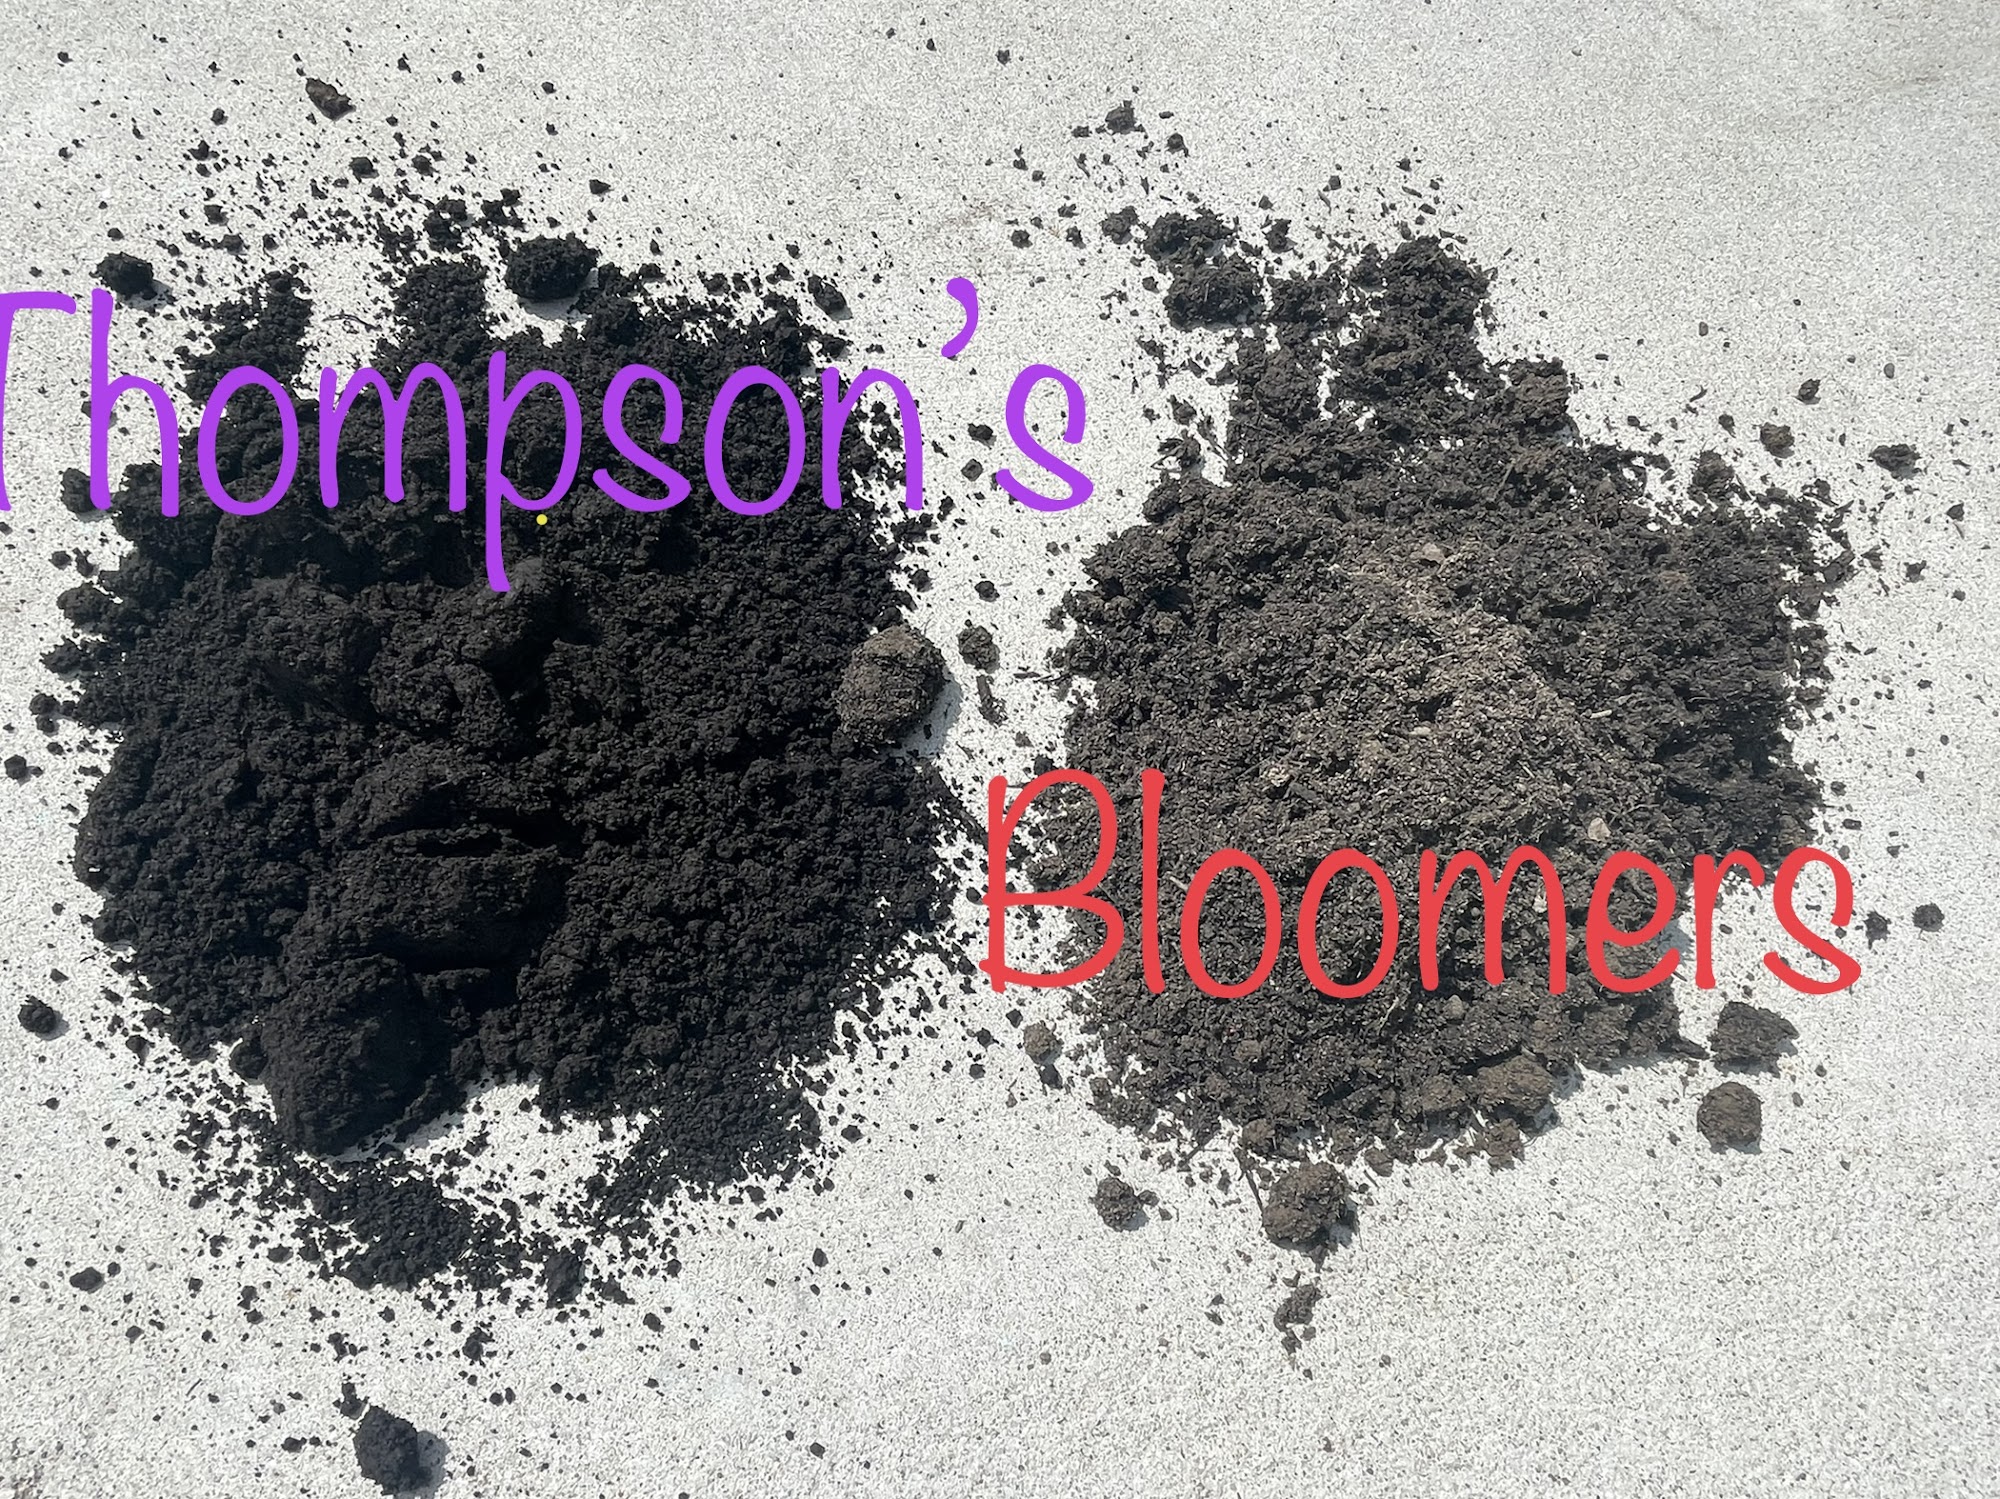 Thompson Excavating 39088 State Hwy 47, Aitkin Minnesota 56431